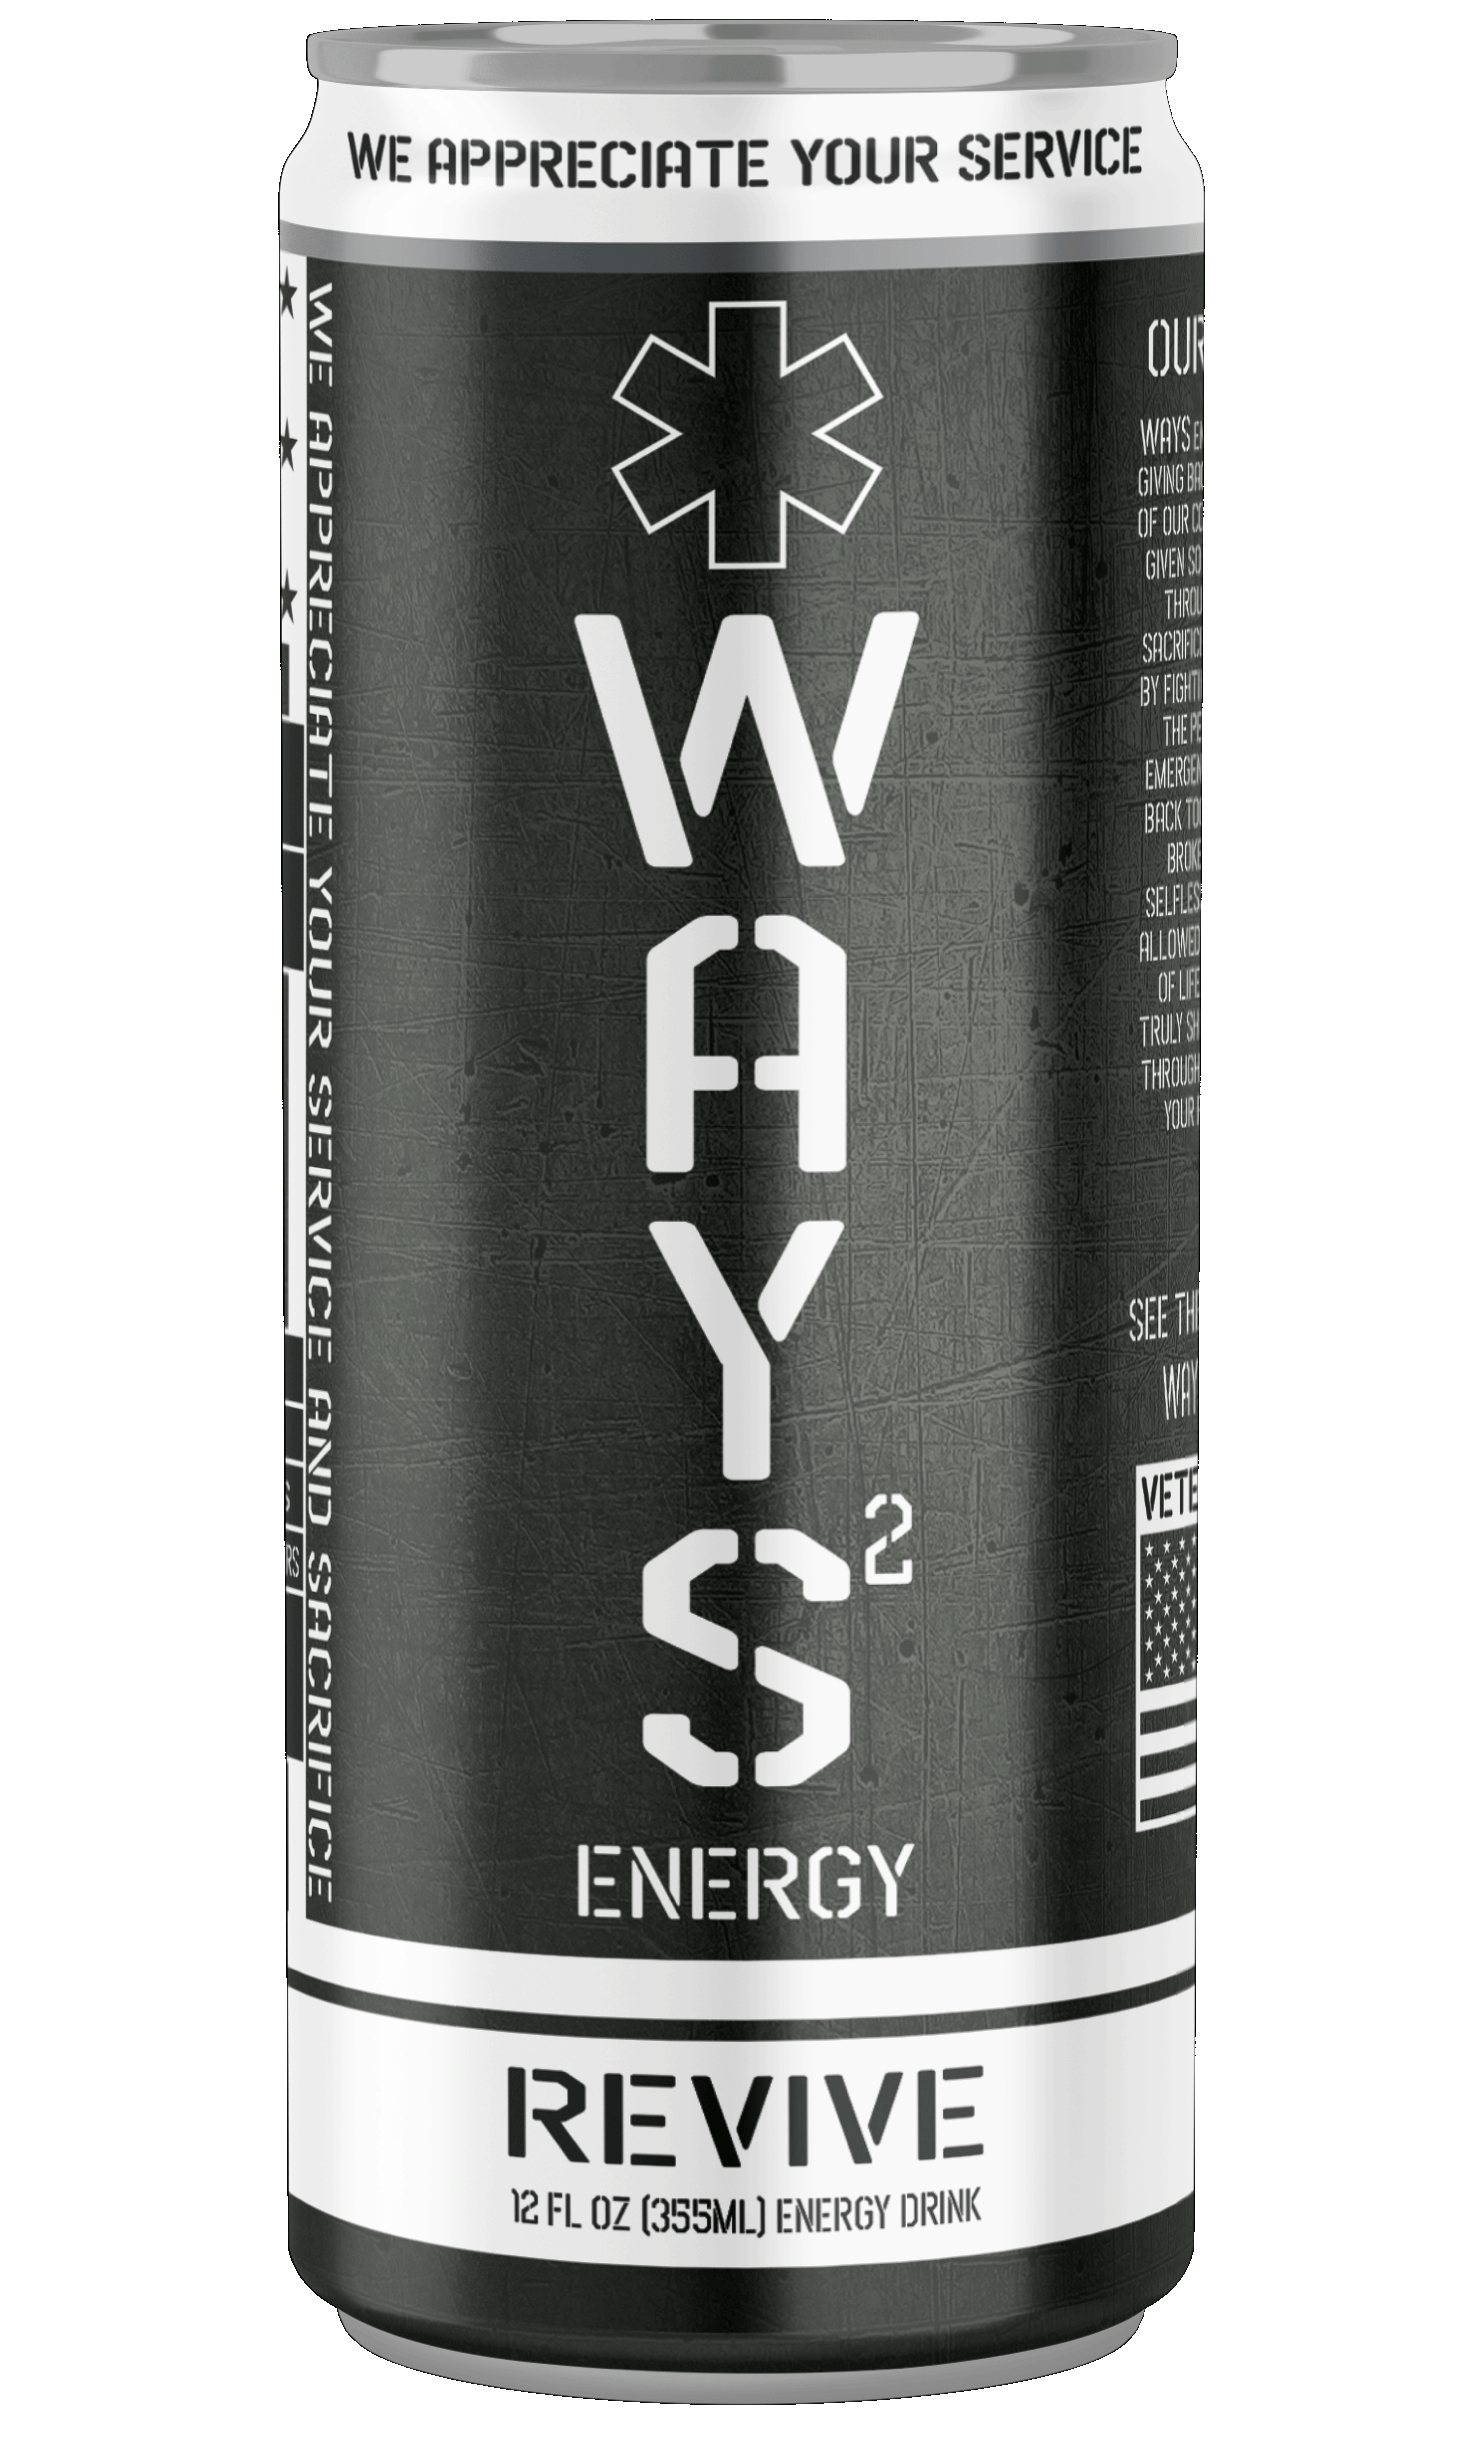 Classic Energy Drink | Energy Booster Drink | WAYS Energy